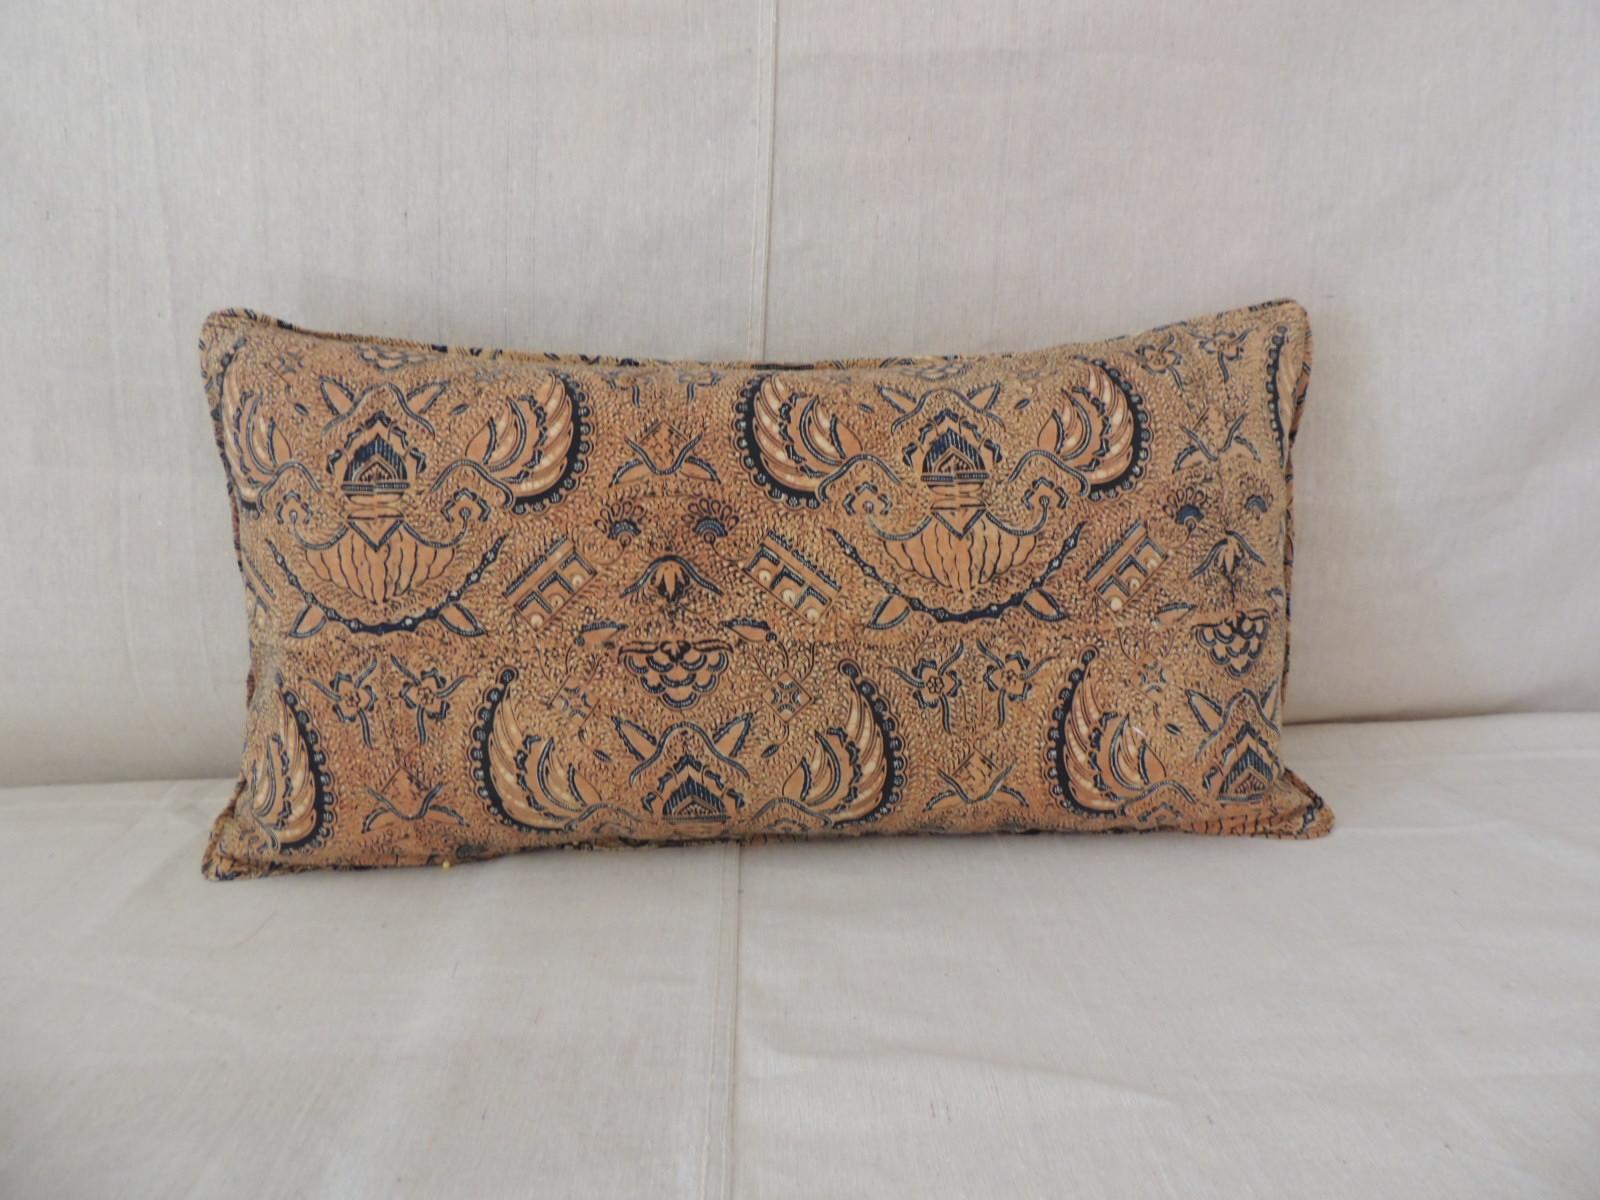 Hand-Crafted Vintage Yellow and Blue Hand-Blocked Batik Long Bolster Decorative Pillow